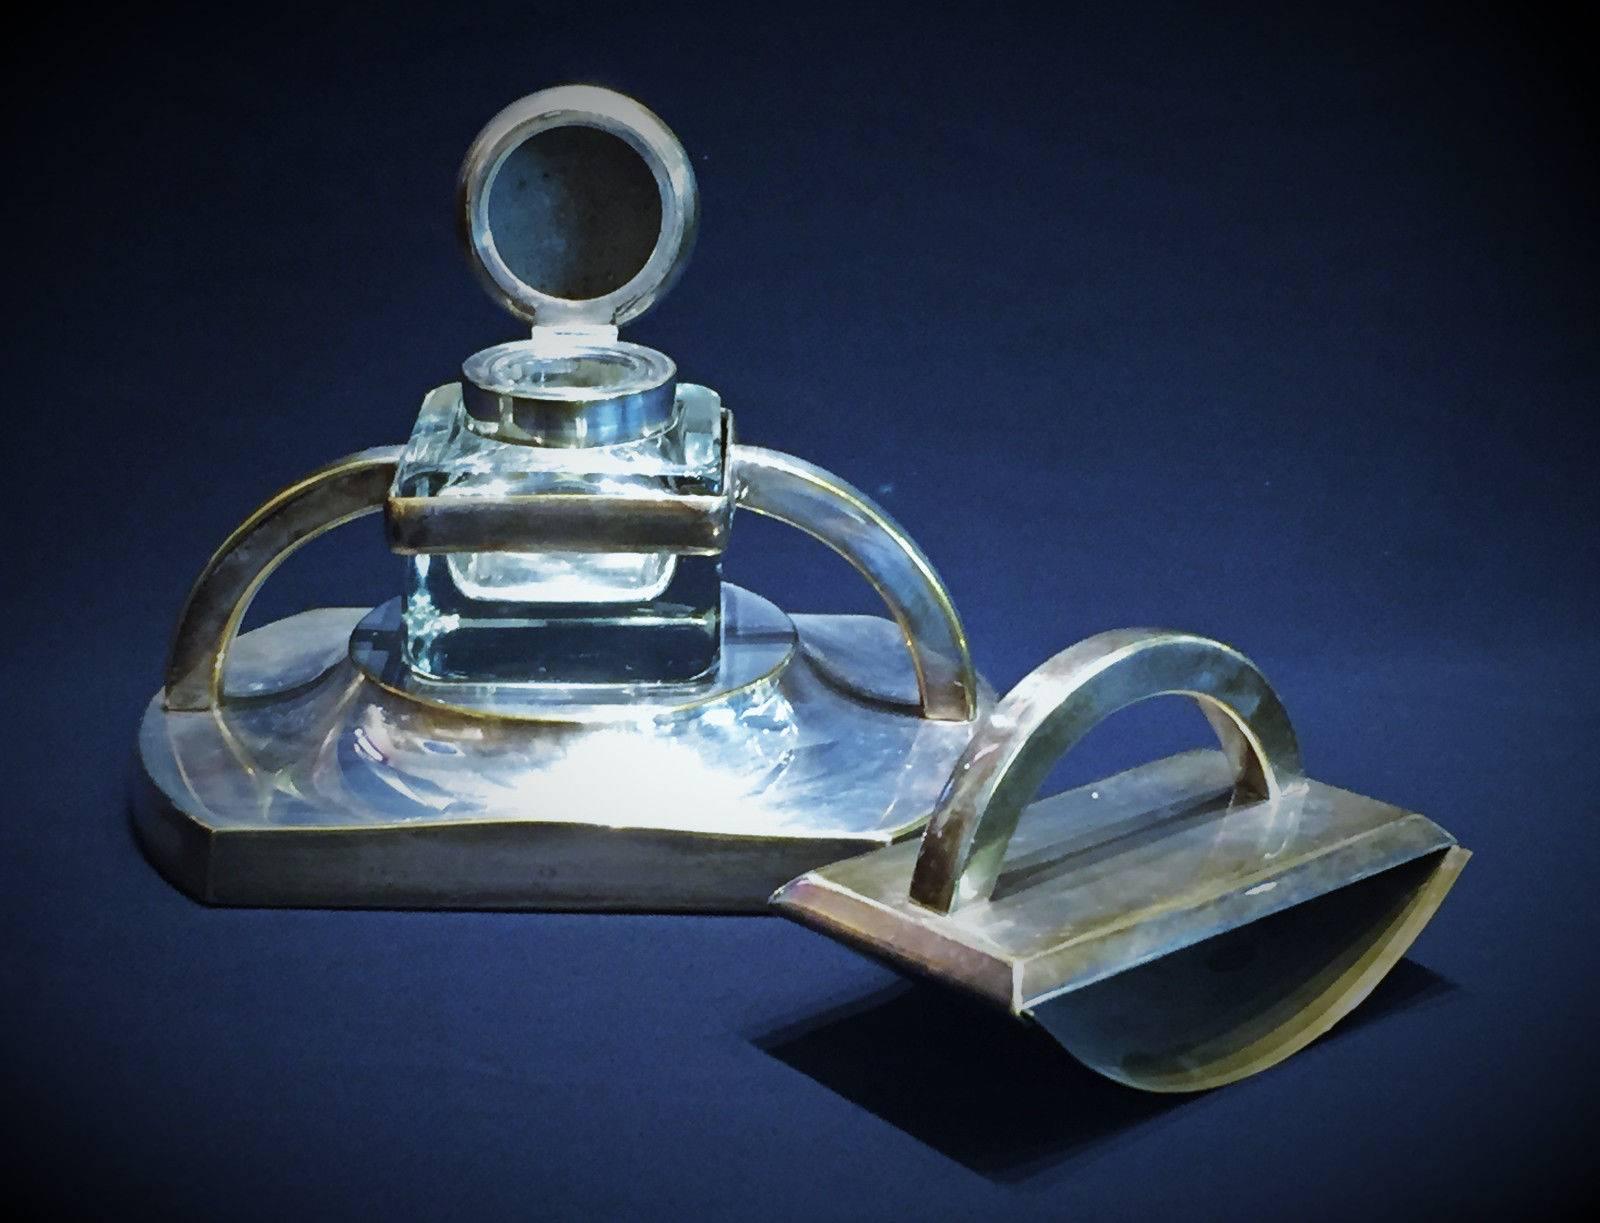 Wonderful in its unique Austrian Jugenstil style and very strong masculine streamlined design, this stunning desk set of inkstand and ink rocker blotter was made in Vienna, Austria, circa 1900. Unmarked. 

Dimensions:
Inkstand base: H: 6 x W: 9 x